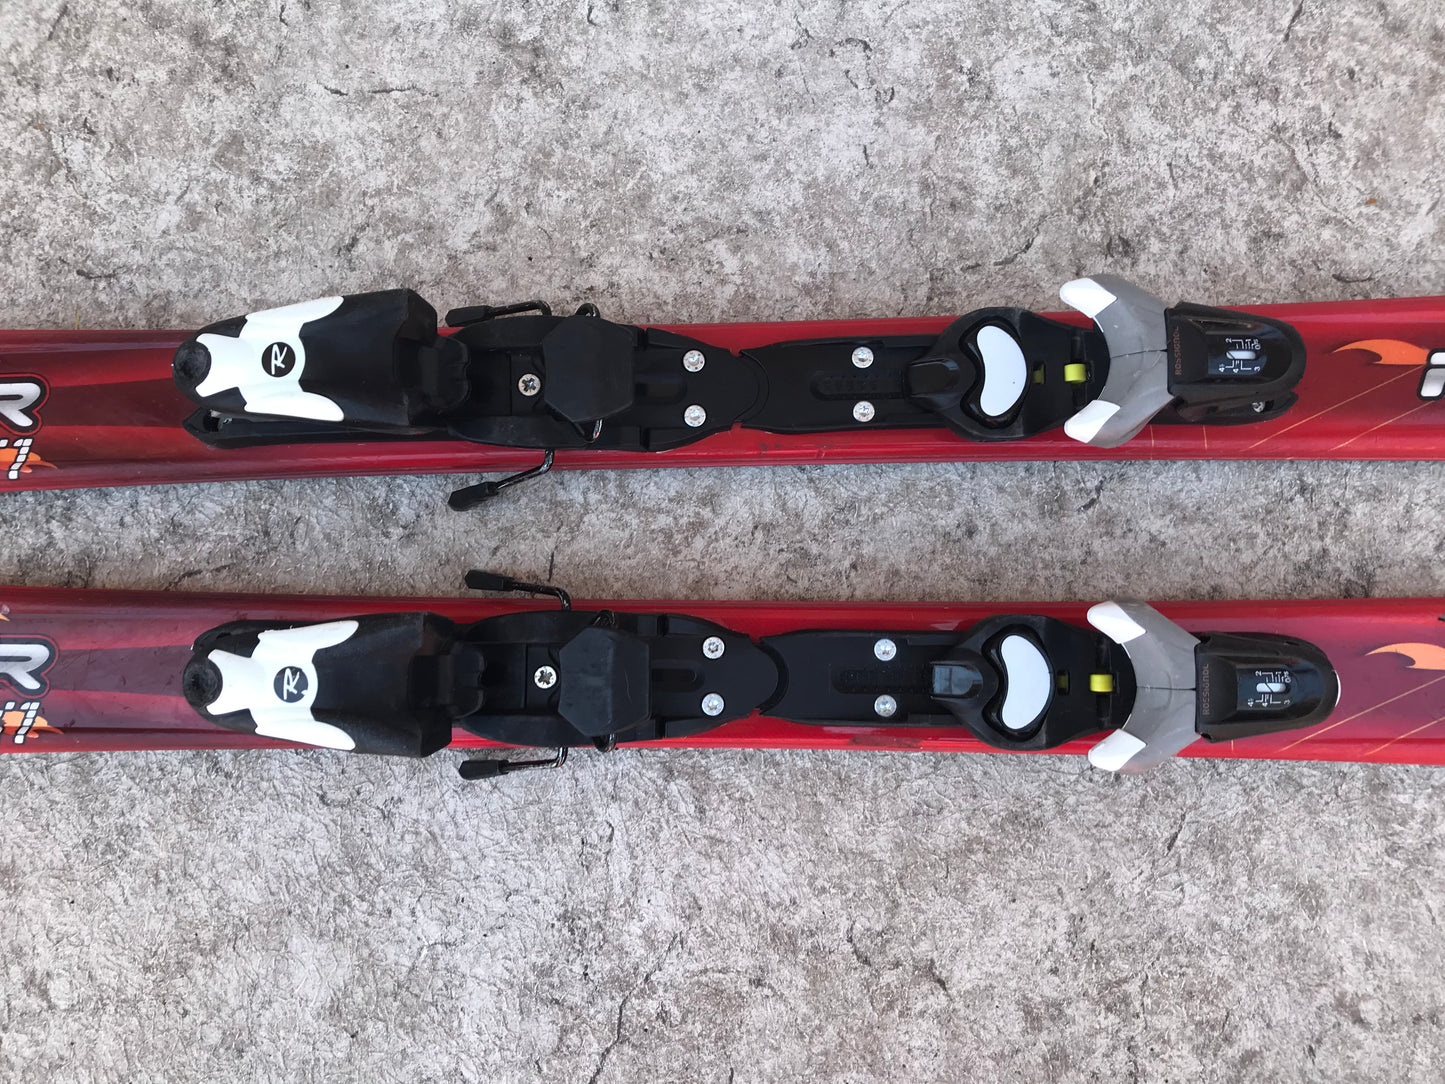 Ski 130 Rossignol Viper Red Parabolic With Bindings